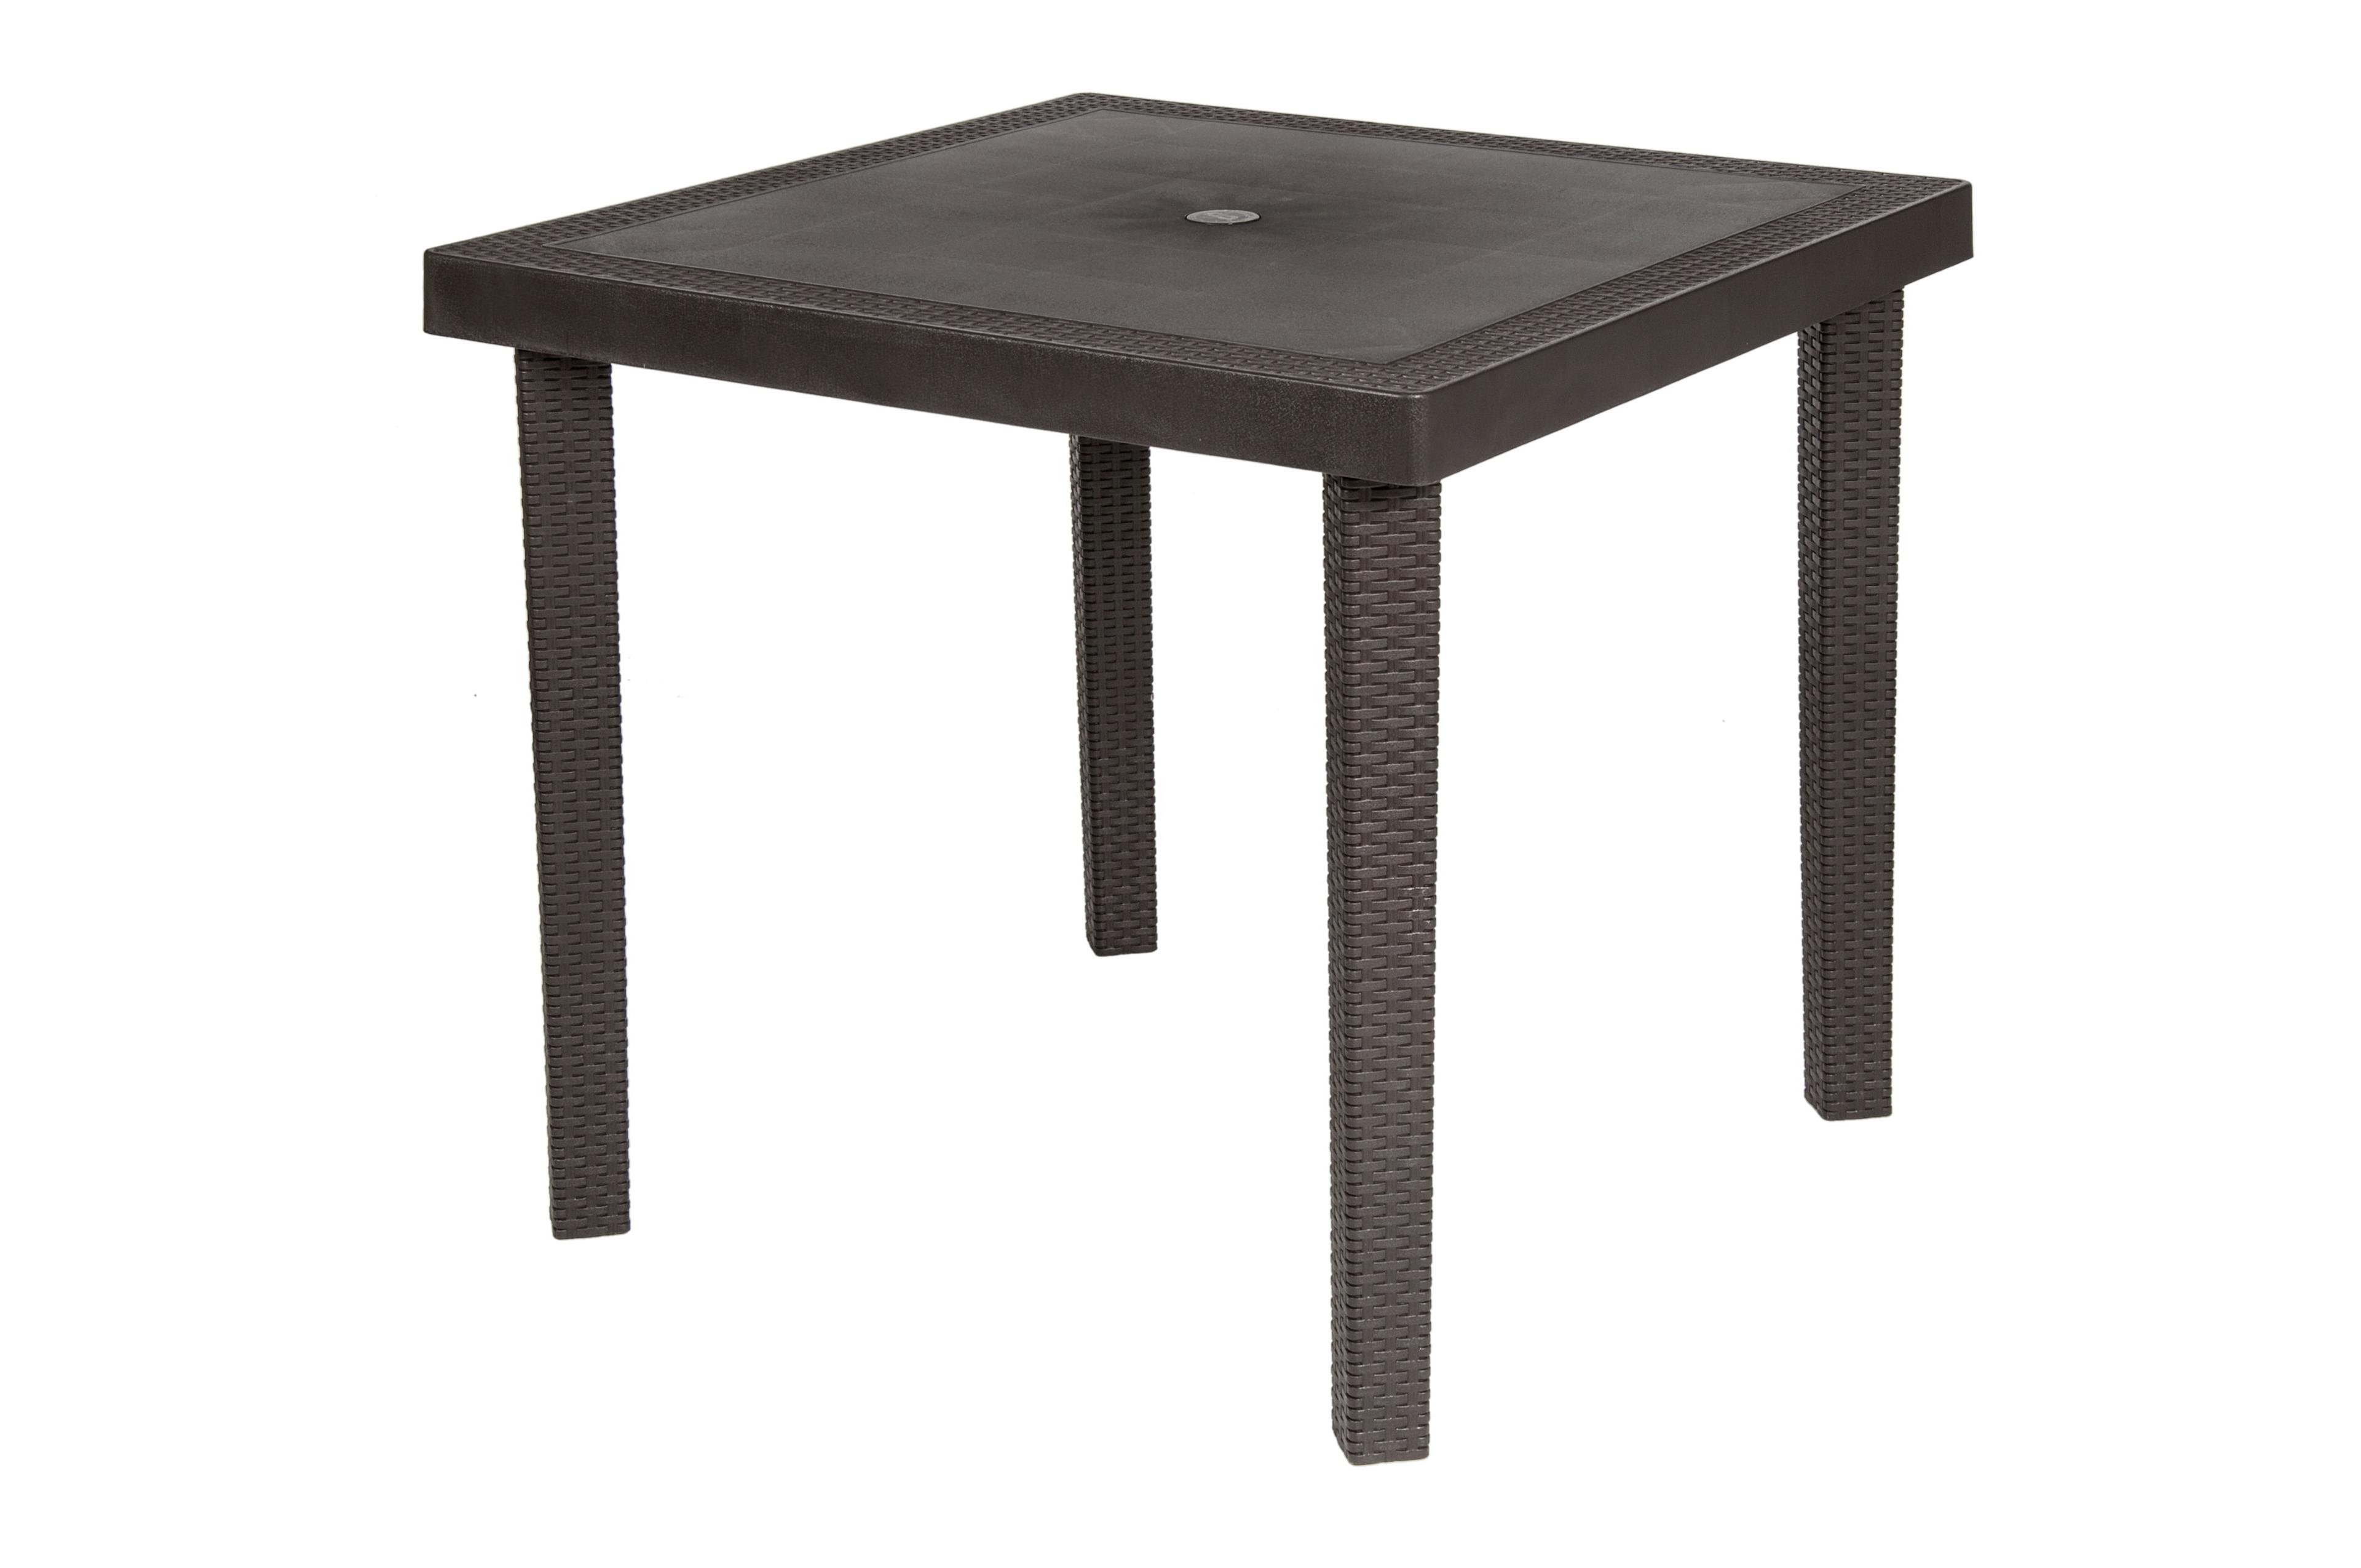 Espresso Resin Square Outdoor Dining Table with Rattan Trim